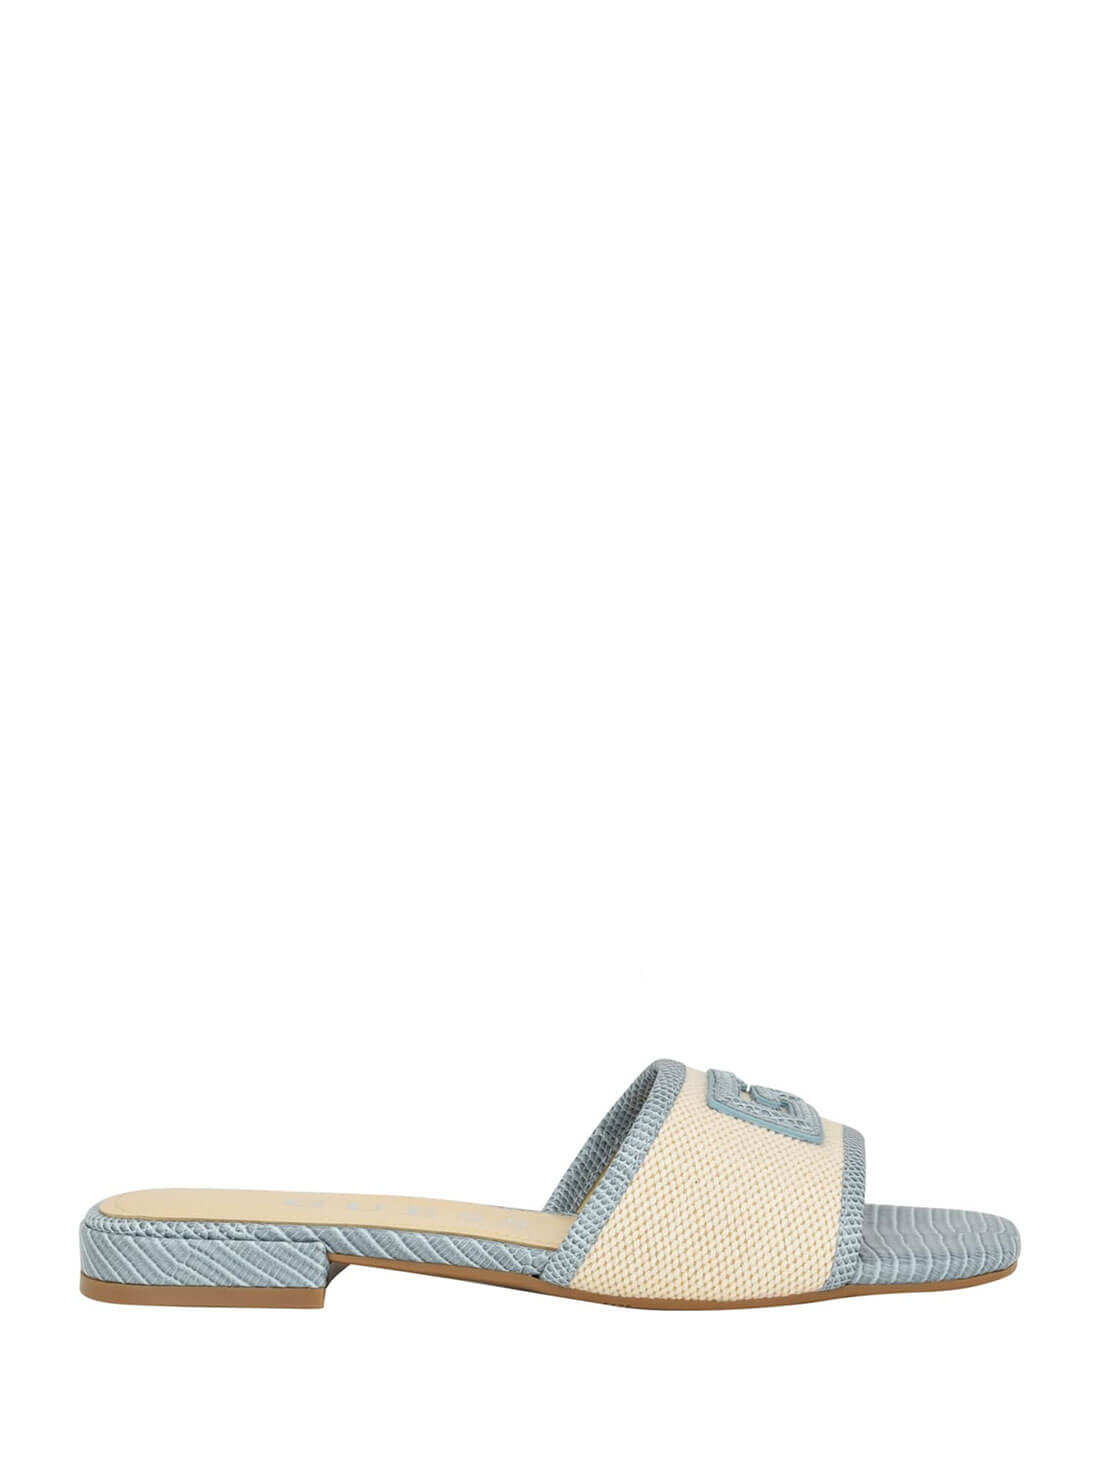 Light Blue Natural Tampa Slide Sandals | GUESS Women's Shoes | side view